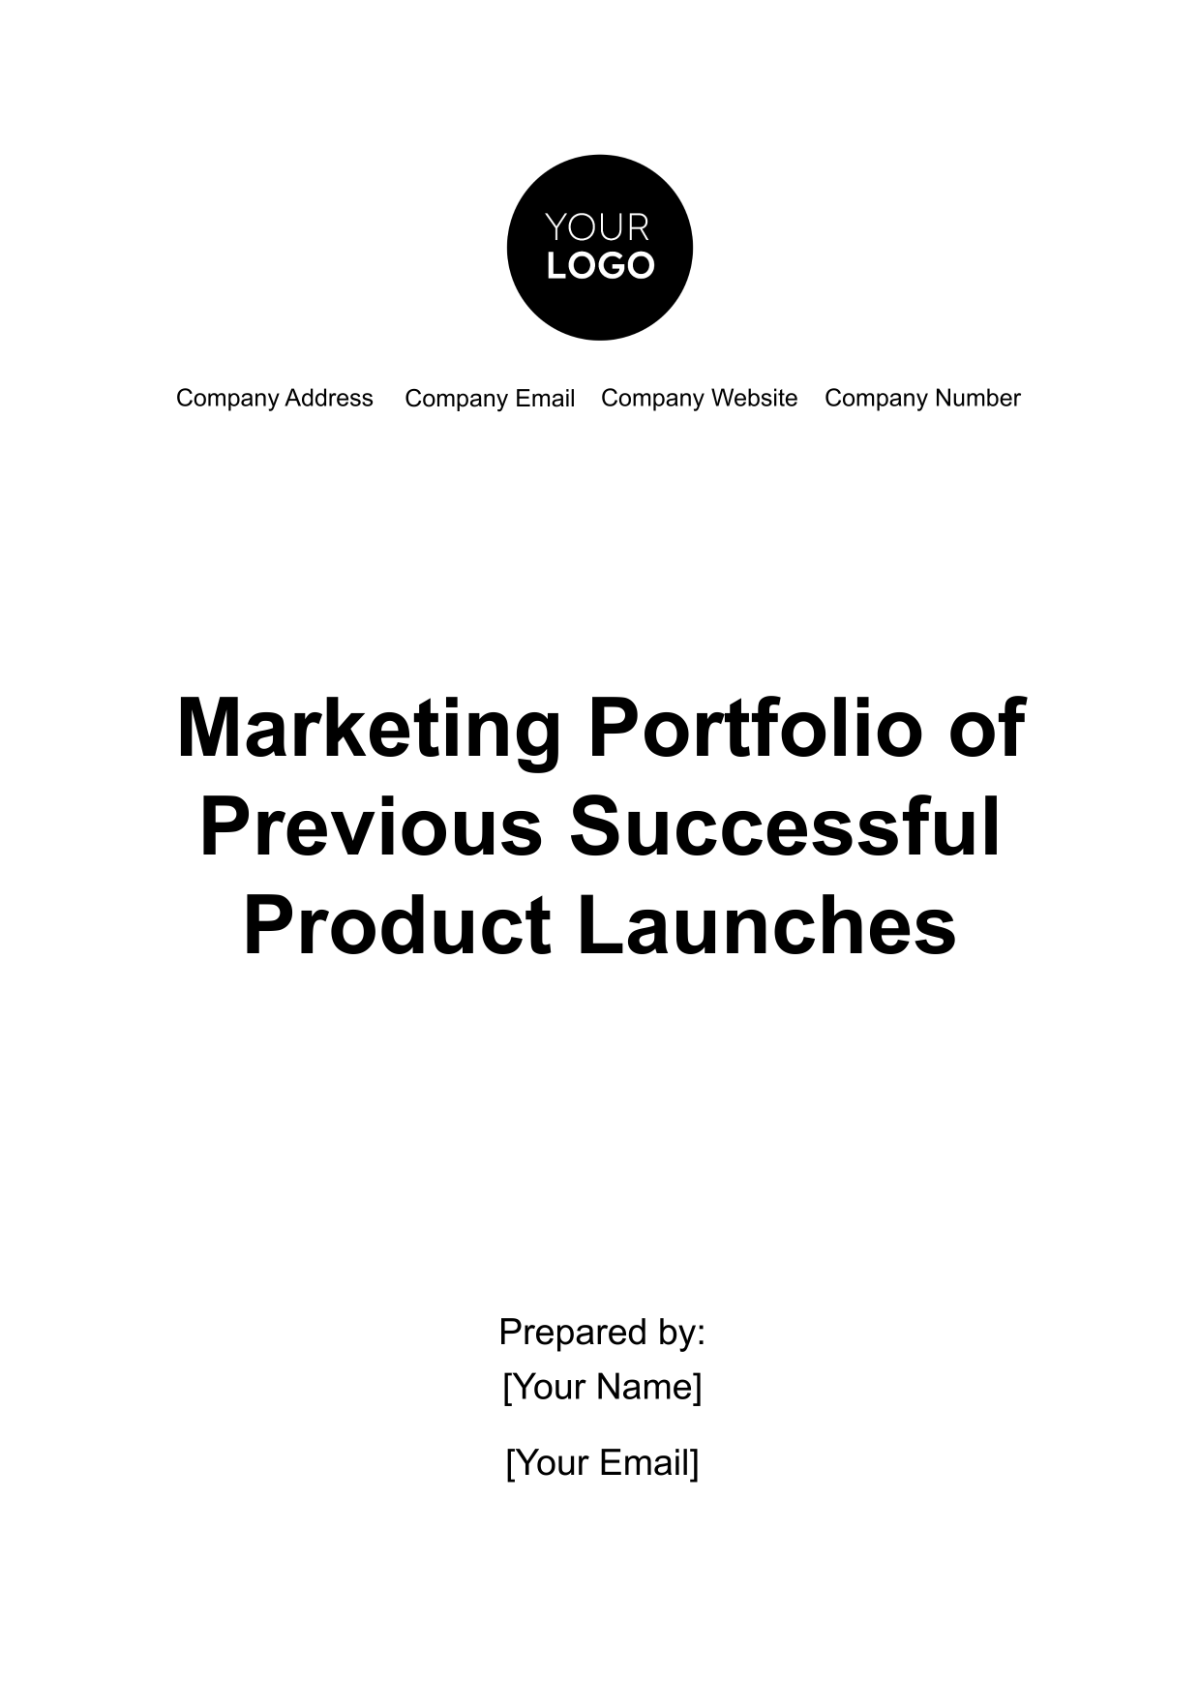 Free Marketing Portfolio of Previous Successful Product Launches Template